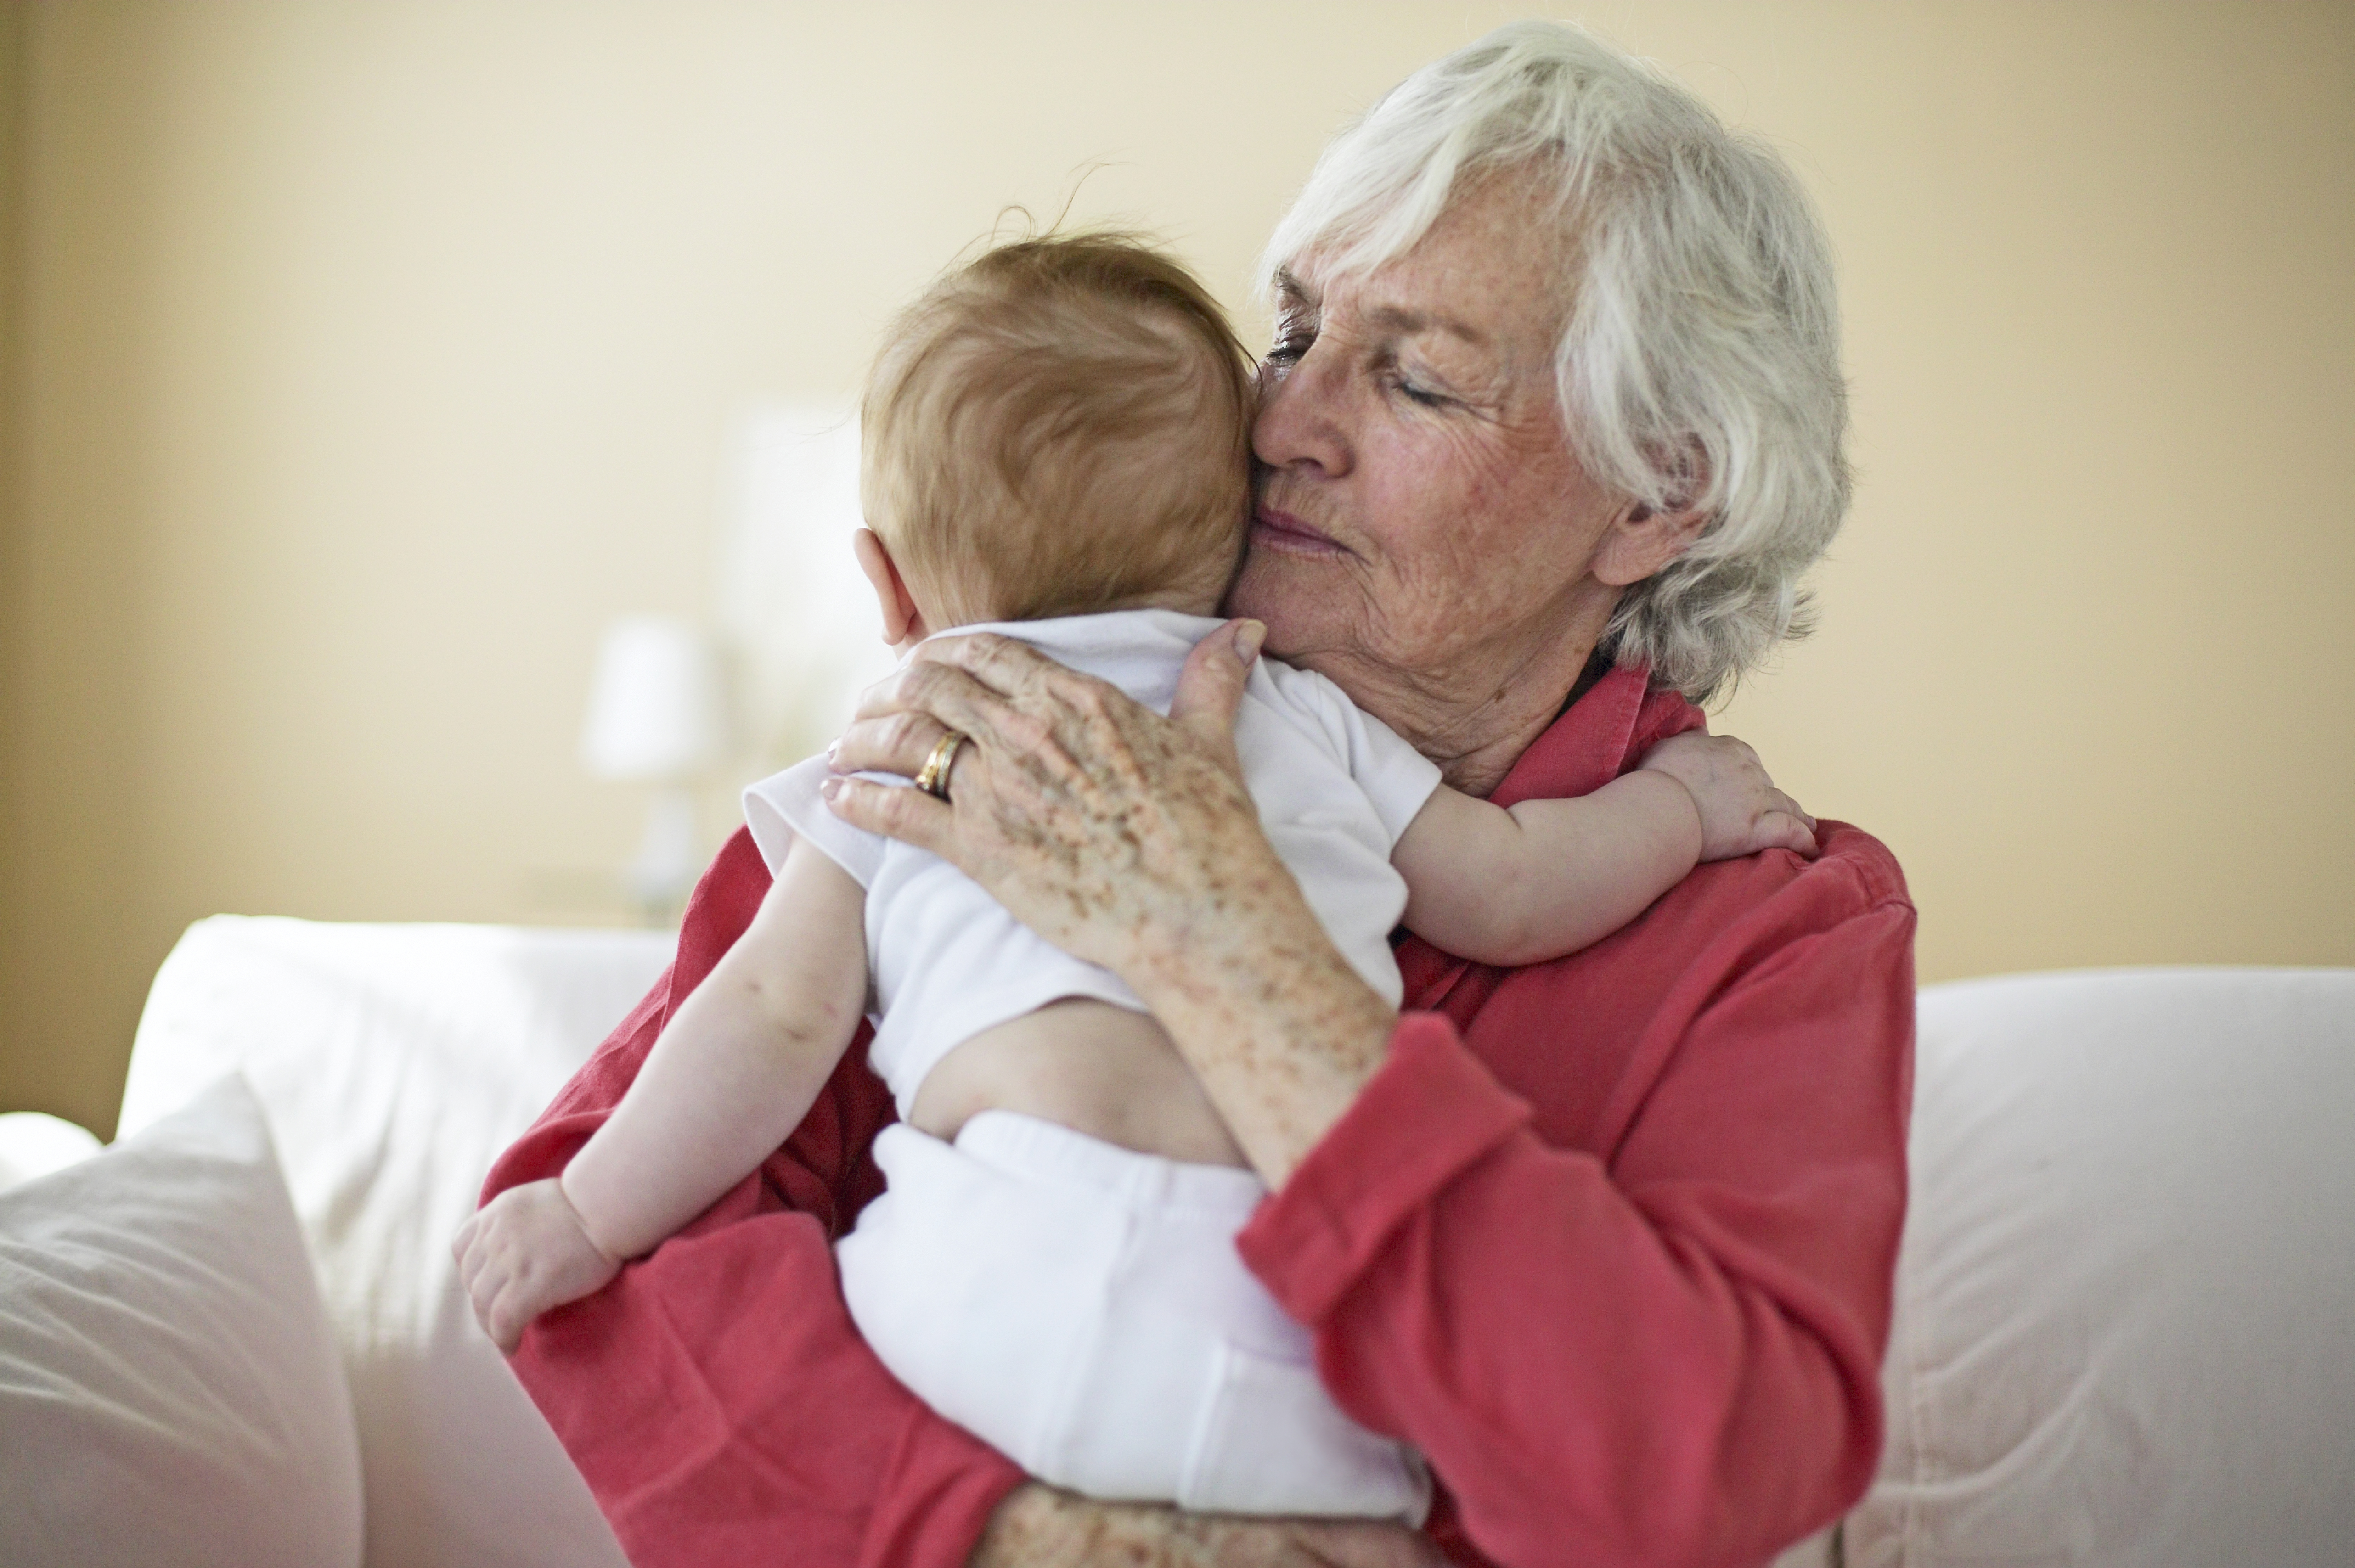 A grandmother hugging a baby | Source: Getty Images